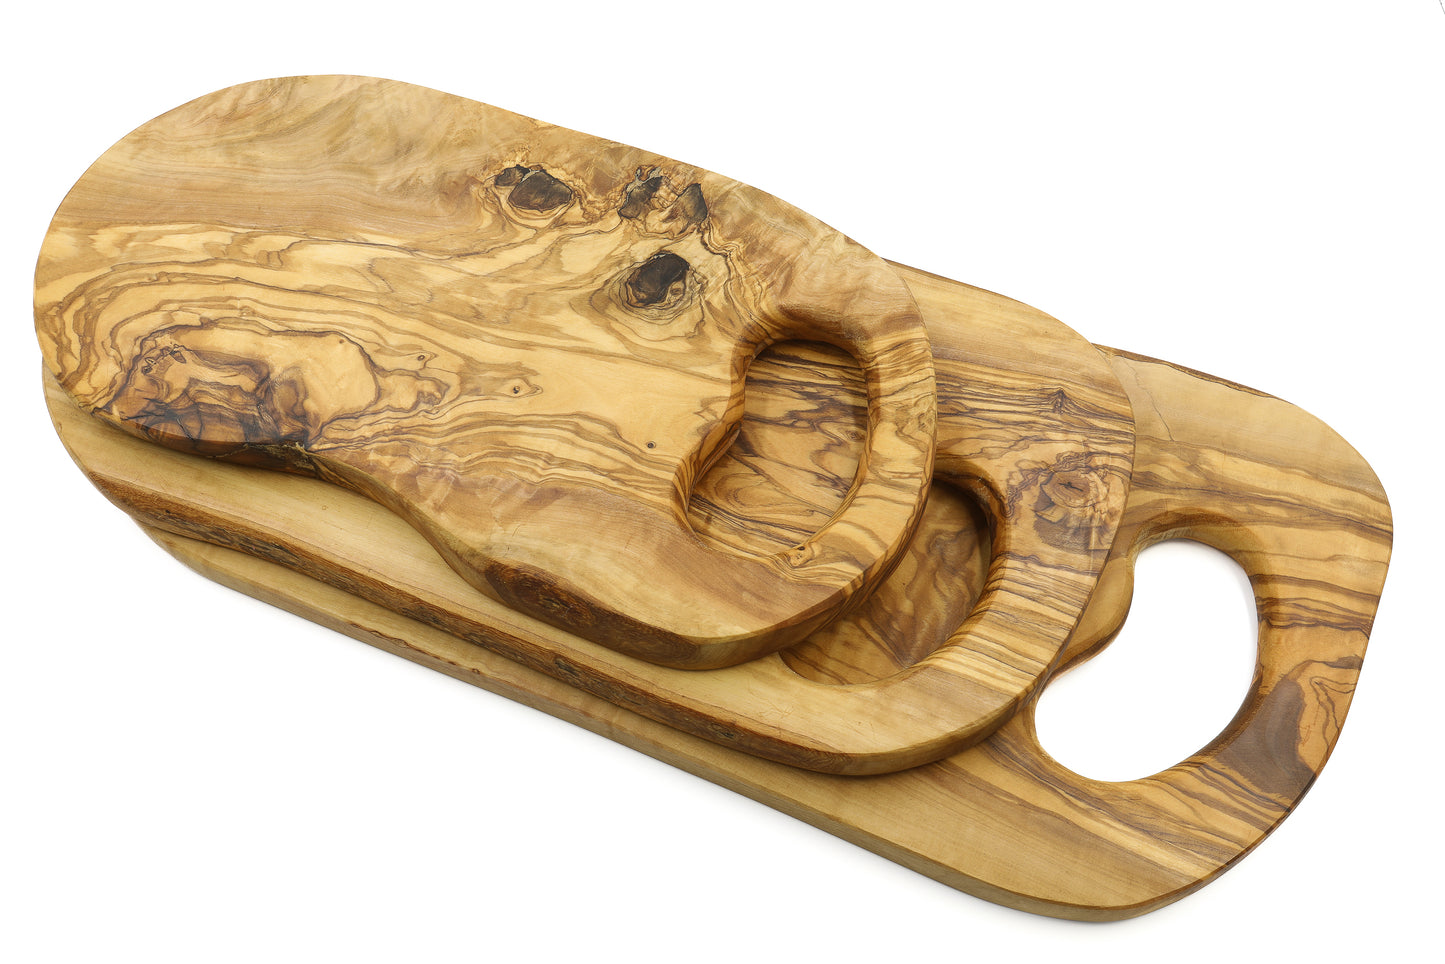 Olive wood chopping board with a comfortable in-hand grip and natural shape